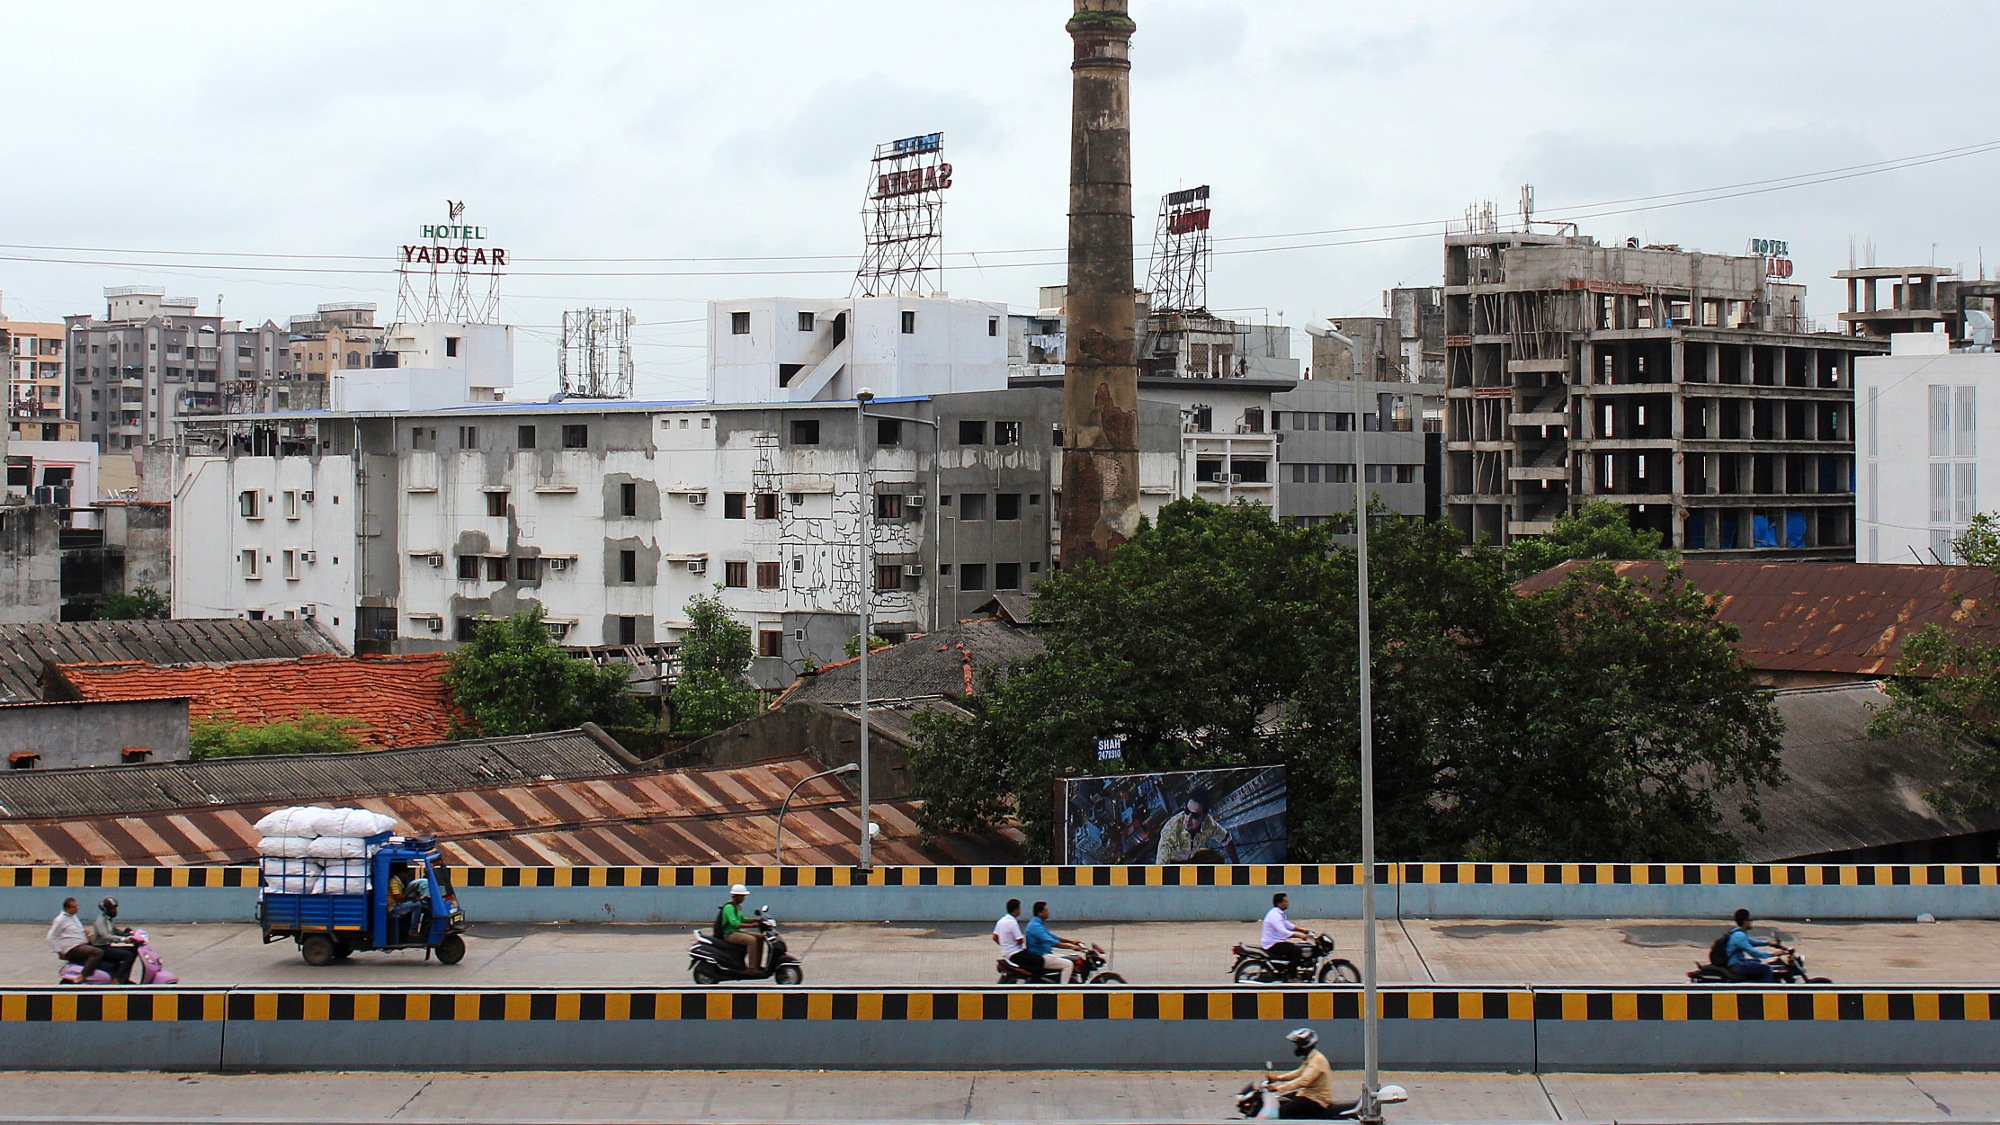 Surat, a random city in India. A main road with motorbikes in Surat photographed from the side.